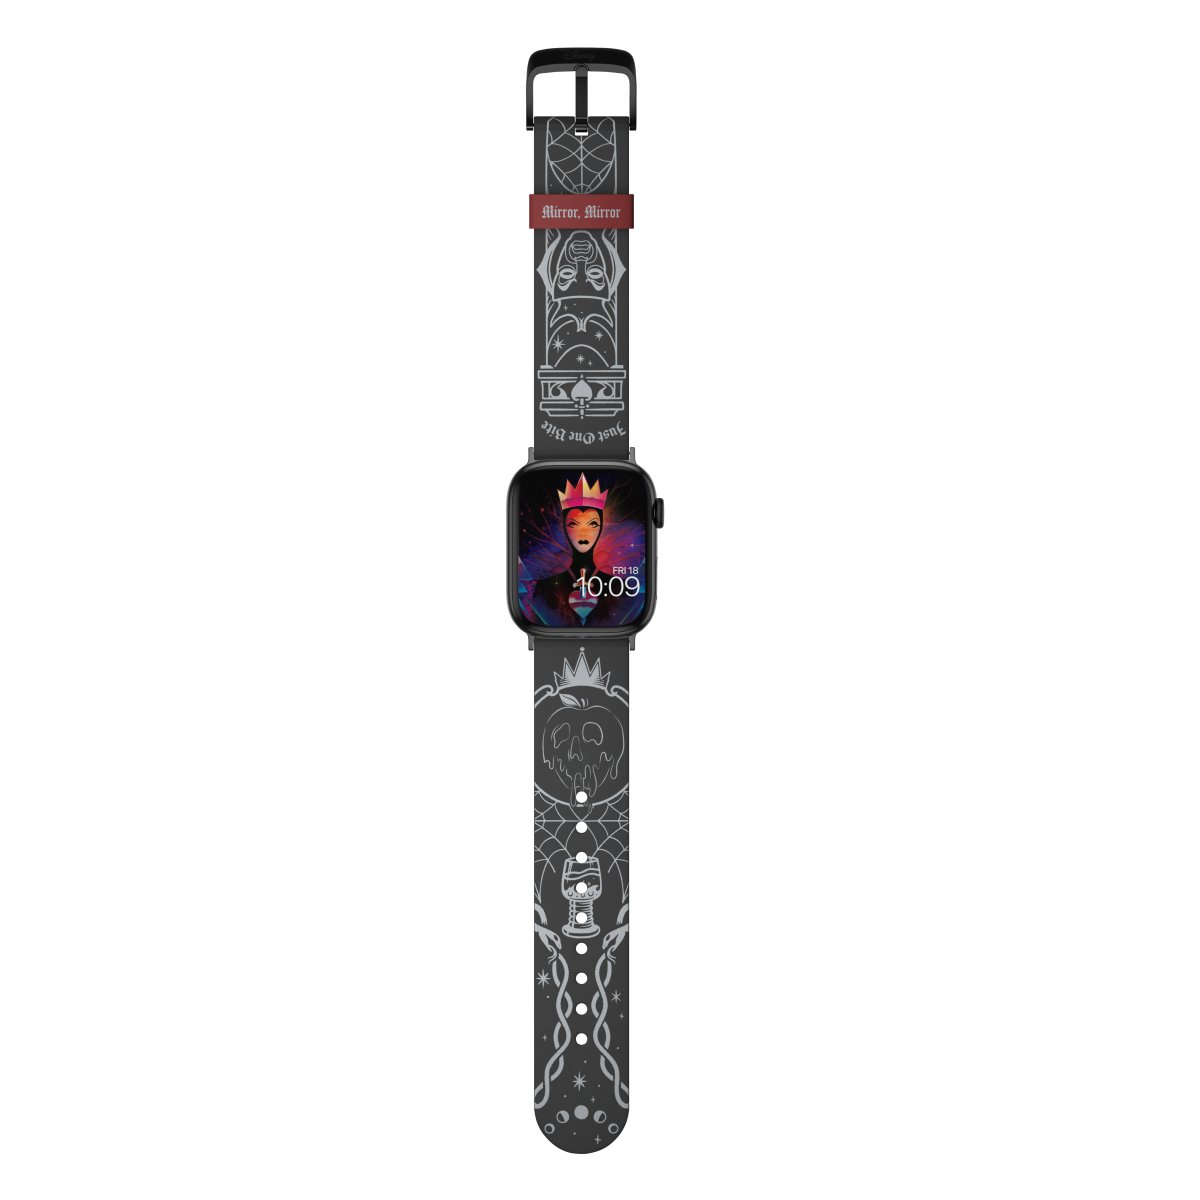 MobyFox Disney Smartwatch Band - Officially Licensed, Compatible with Every Size & Series of Apple Watch (watch Not Included)